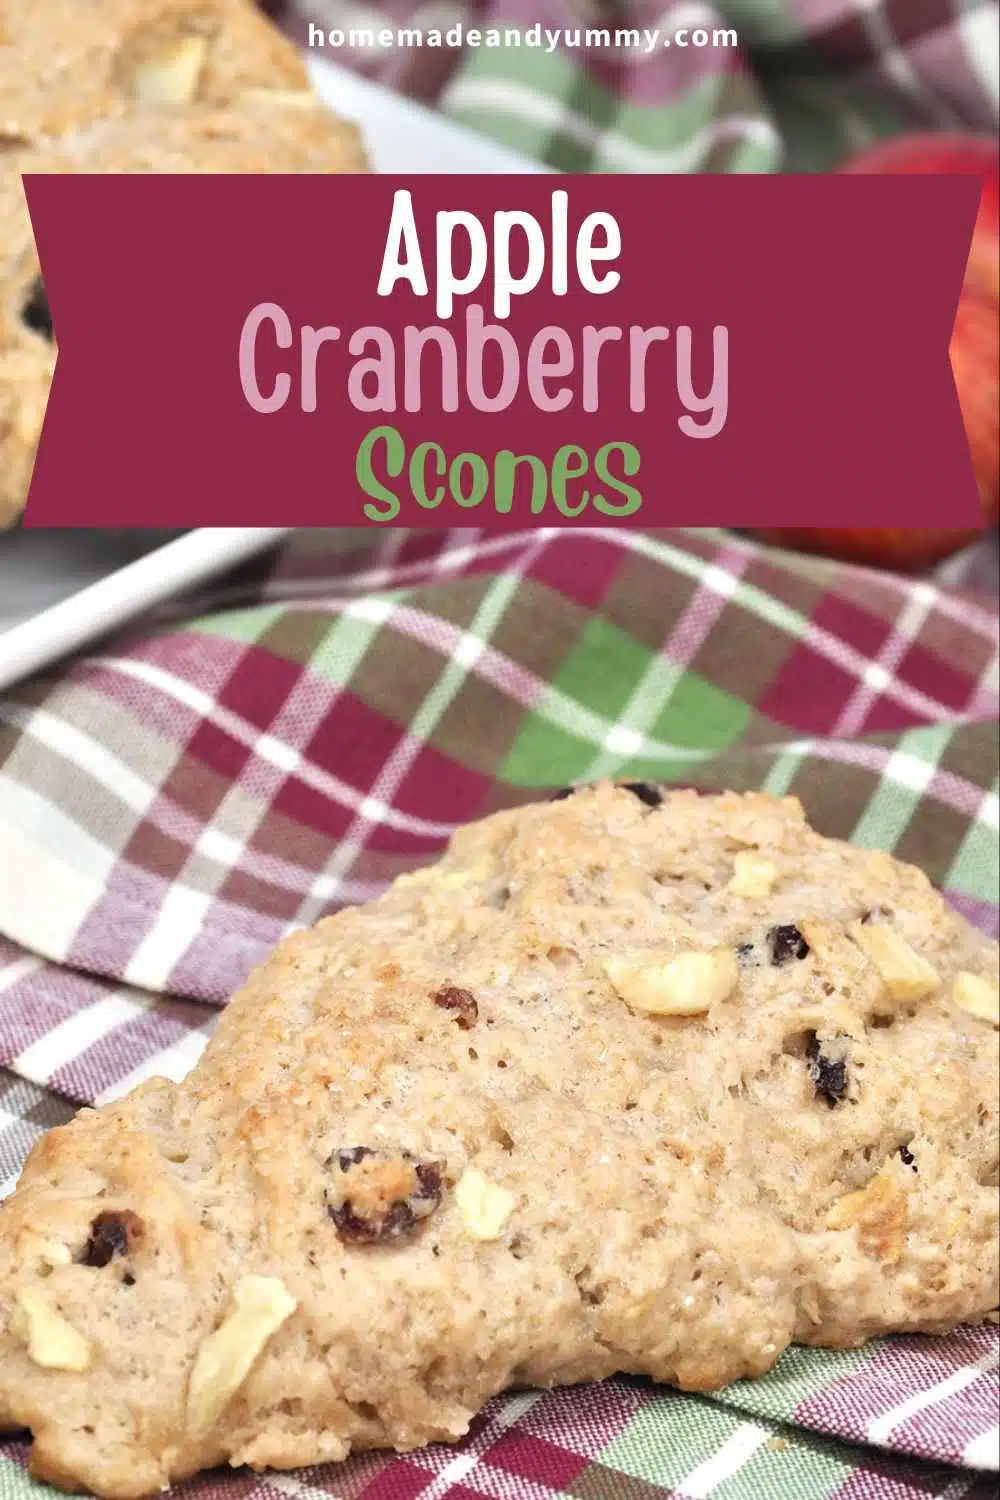 Cranberry Apple Scone for Pinterest.